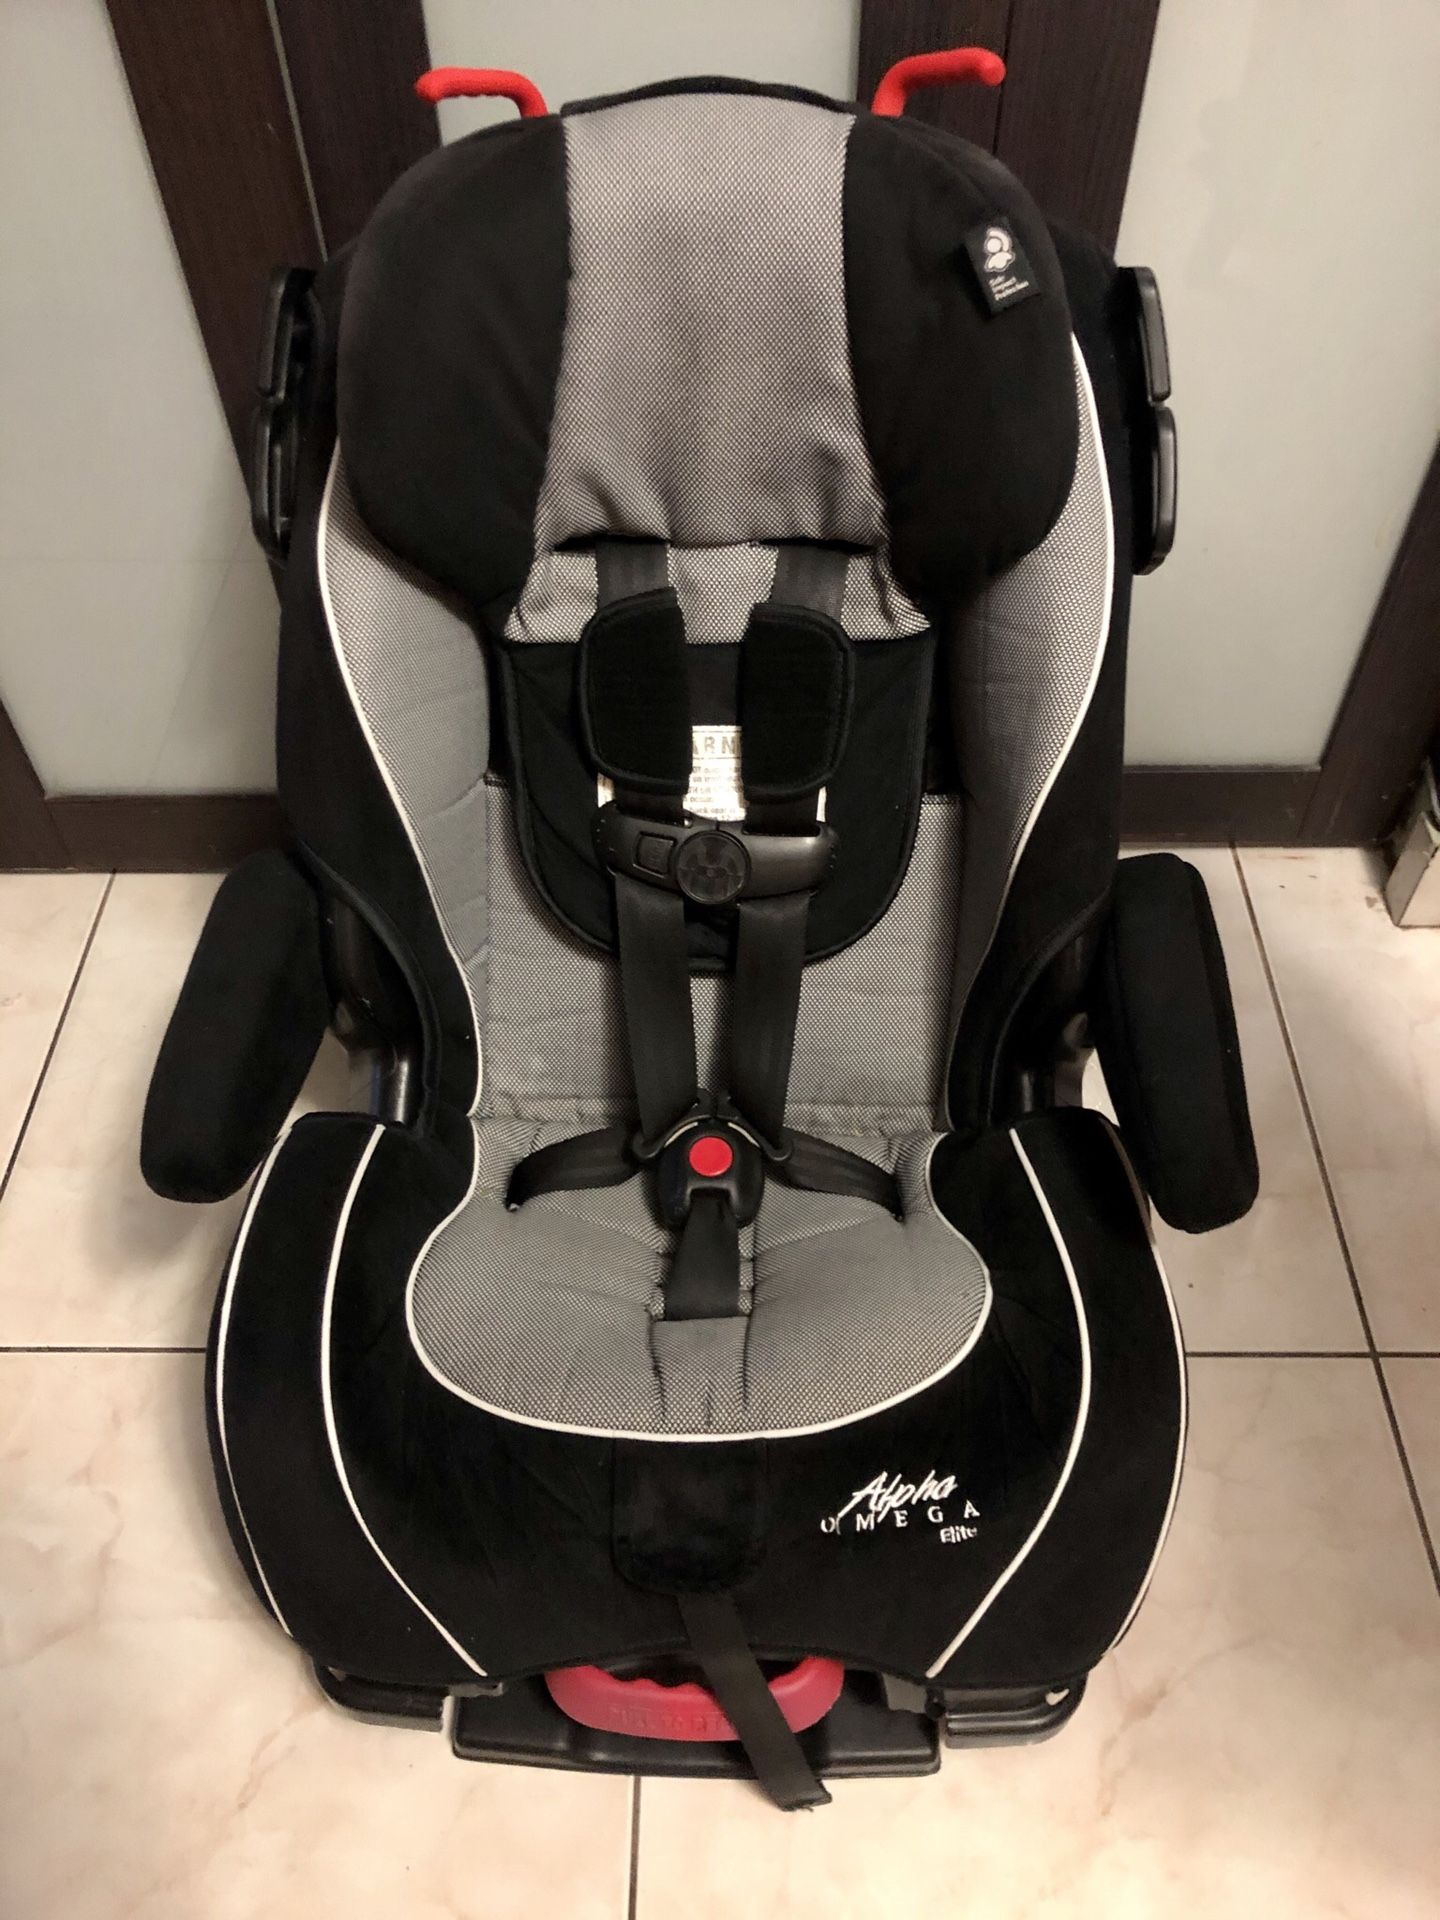 SAFETY FIRST CAR SEAT / BABY CAR SEAT / EXPIRES DECEMBER 2021 FIRM $30